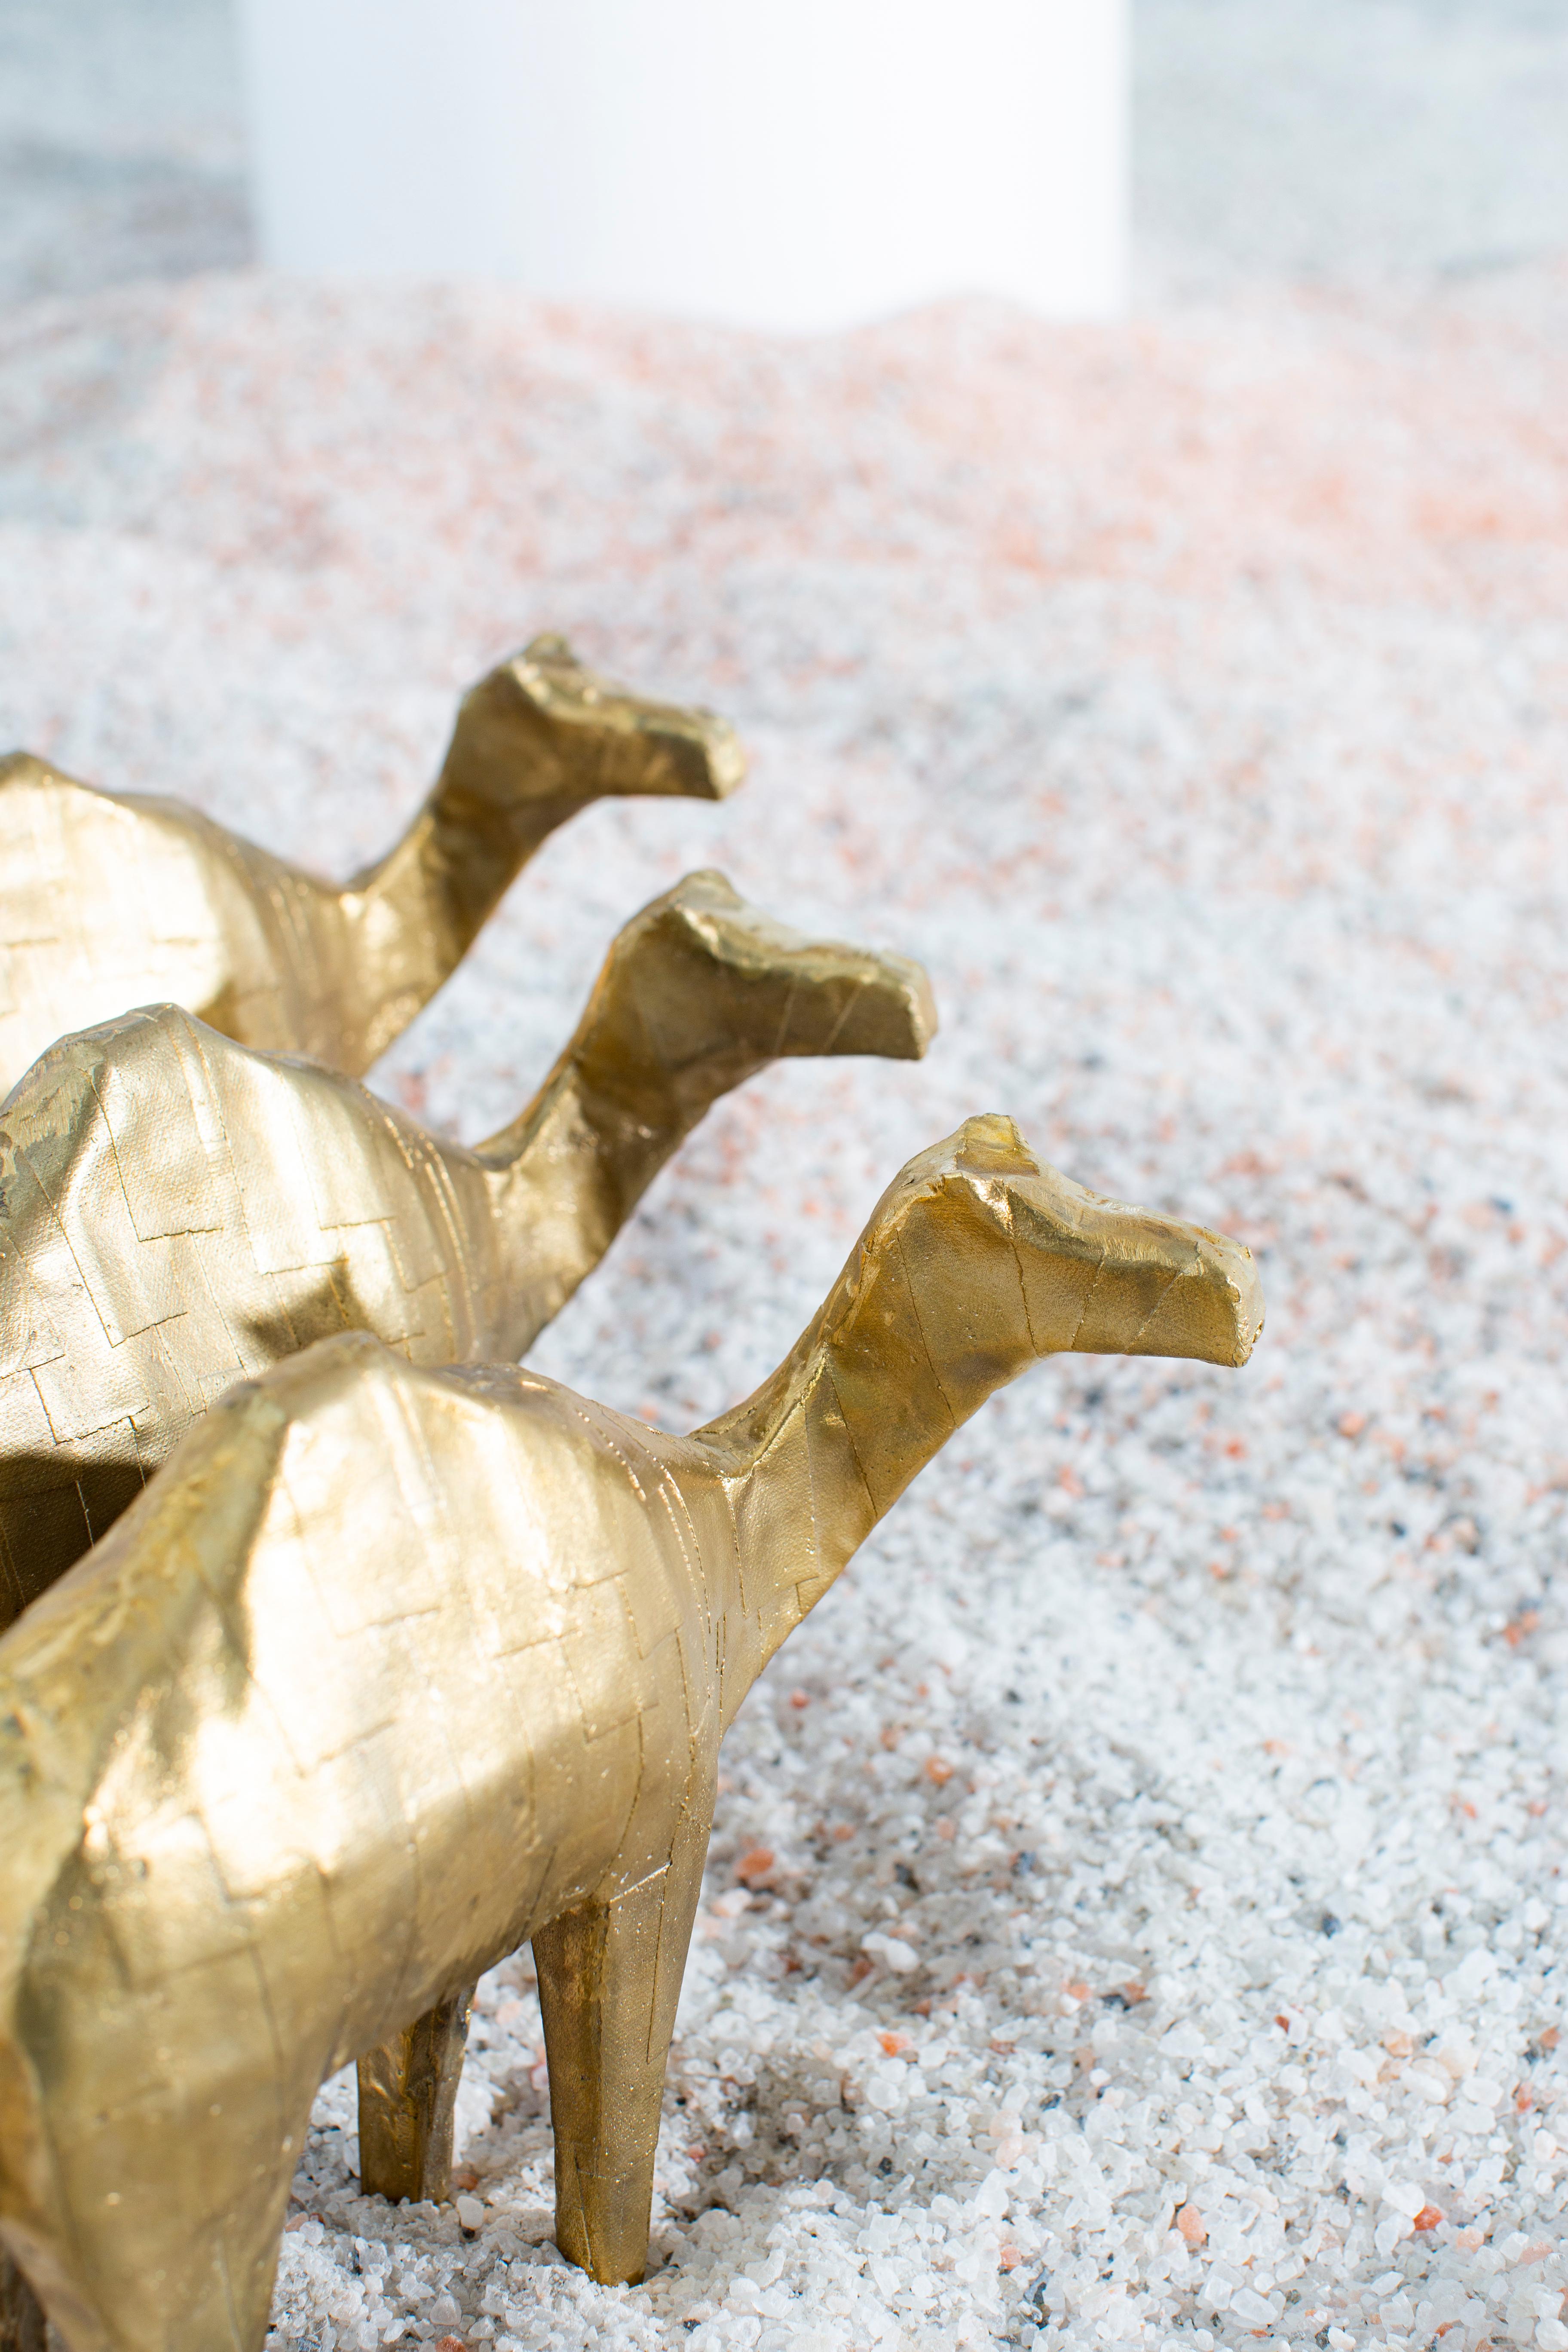 Contemporary Camel Sculpture by Pulpo For Sale